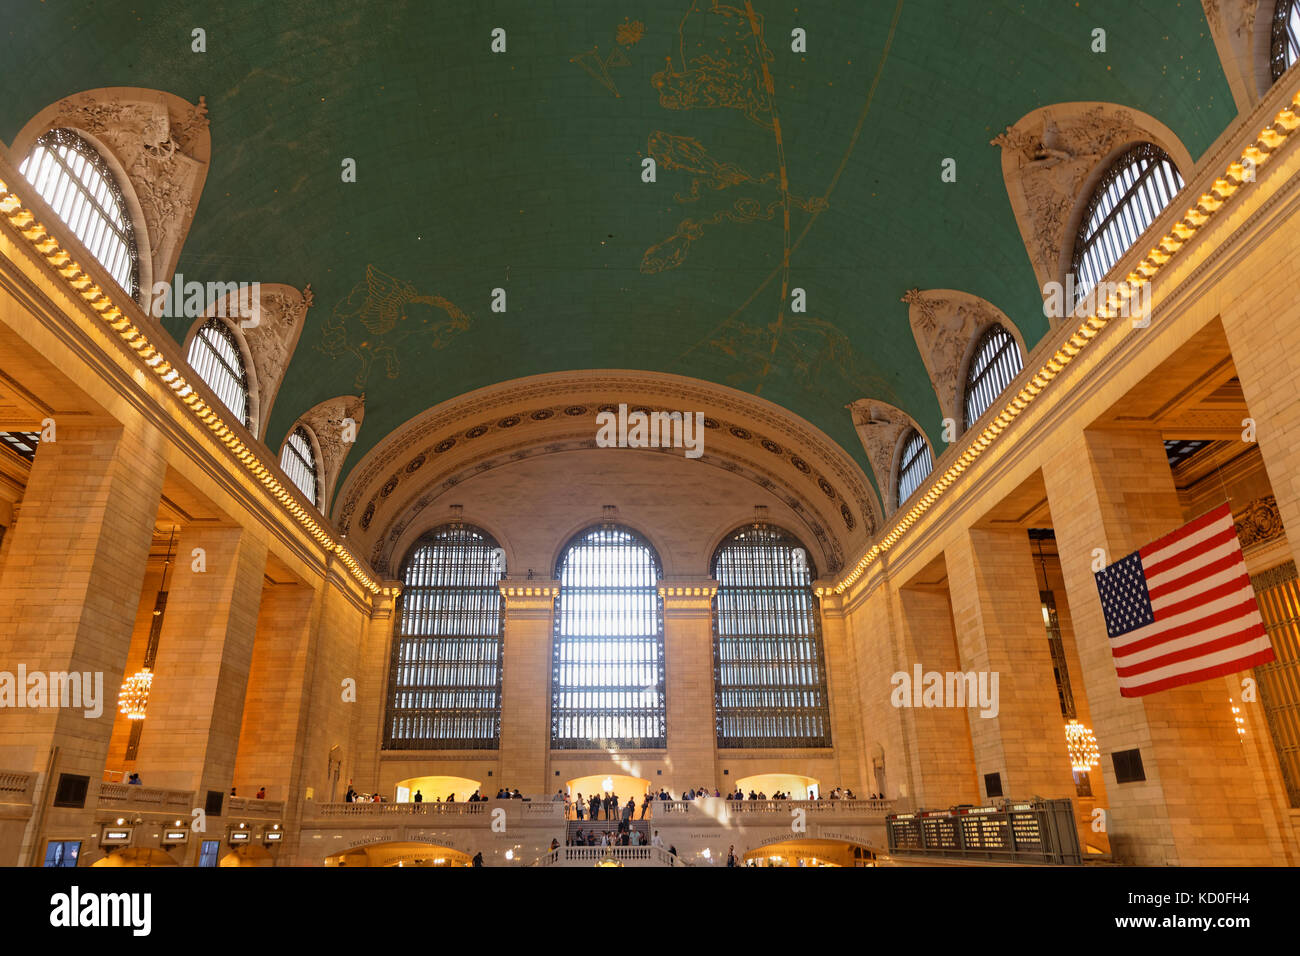 NEW YORK CITY, USA, September 10, 2017 : Grand Central Terminal (also referred to simply as Grand Central or incorrectly as Grand Central Station) is  Stock Photo